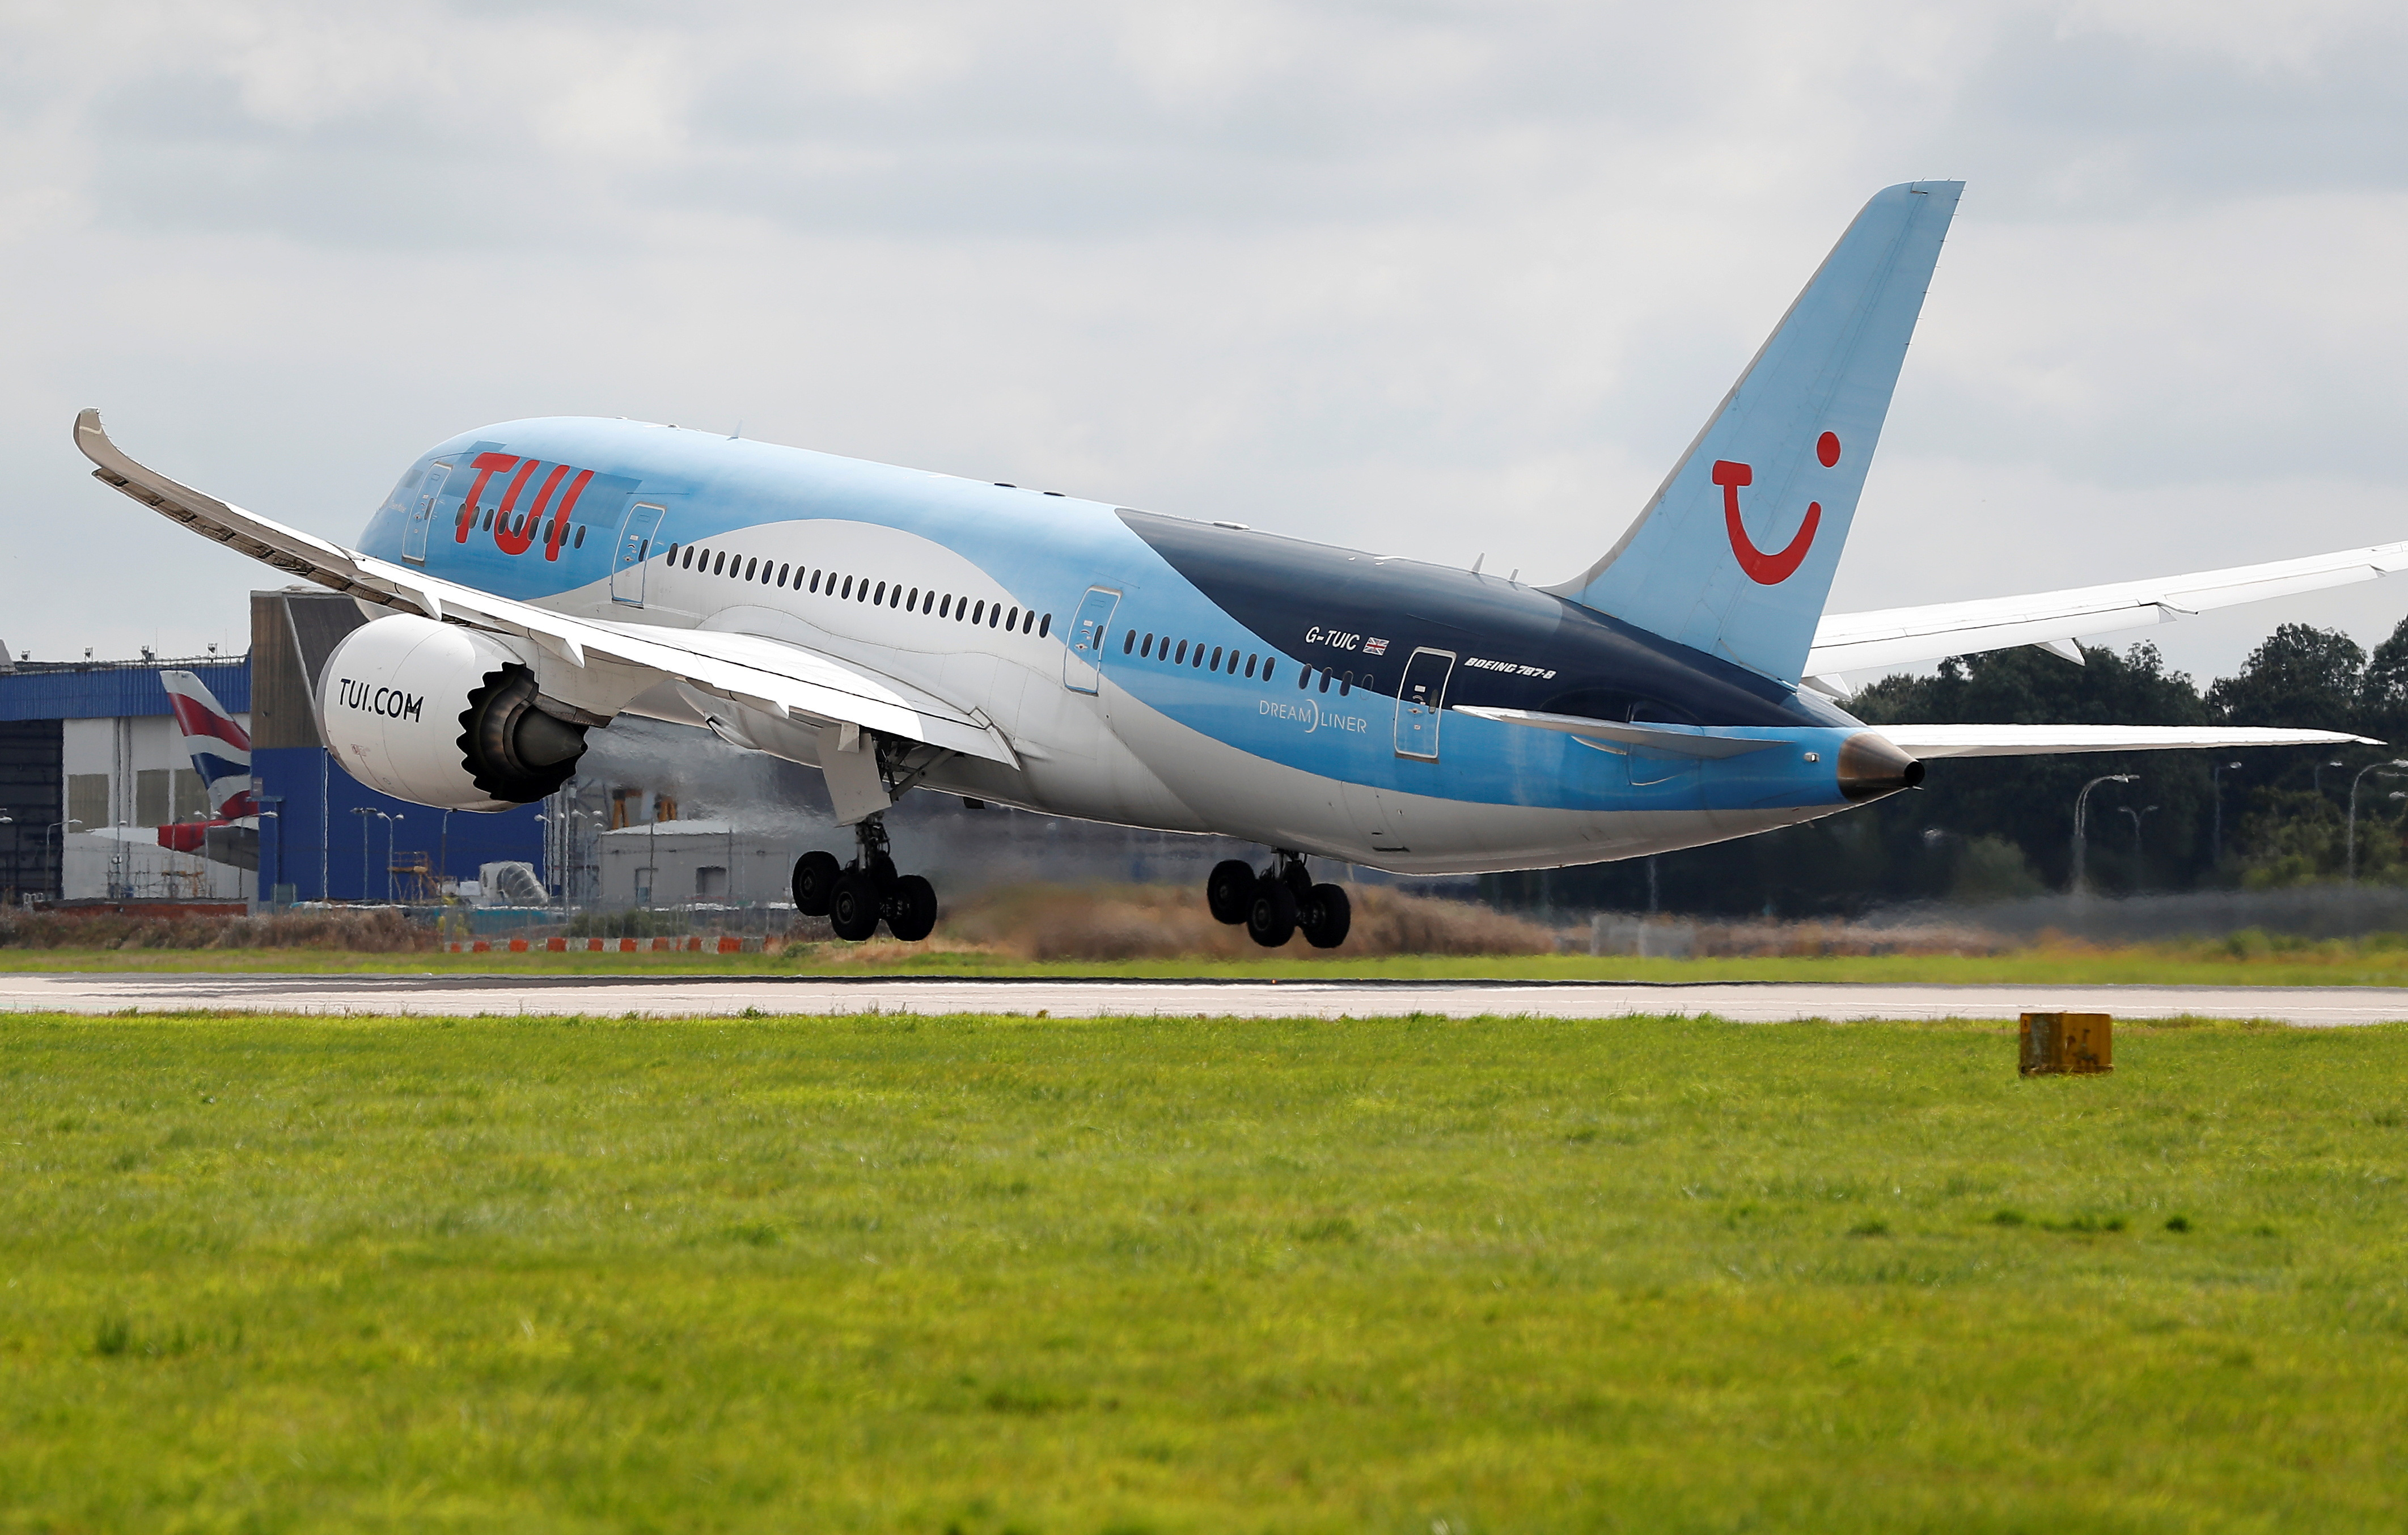 A Boeing 787 of the travel company TUI takes off from the southern runway at Gatwick Airport in Crawley